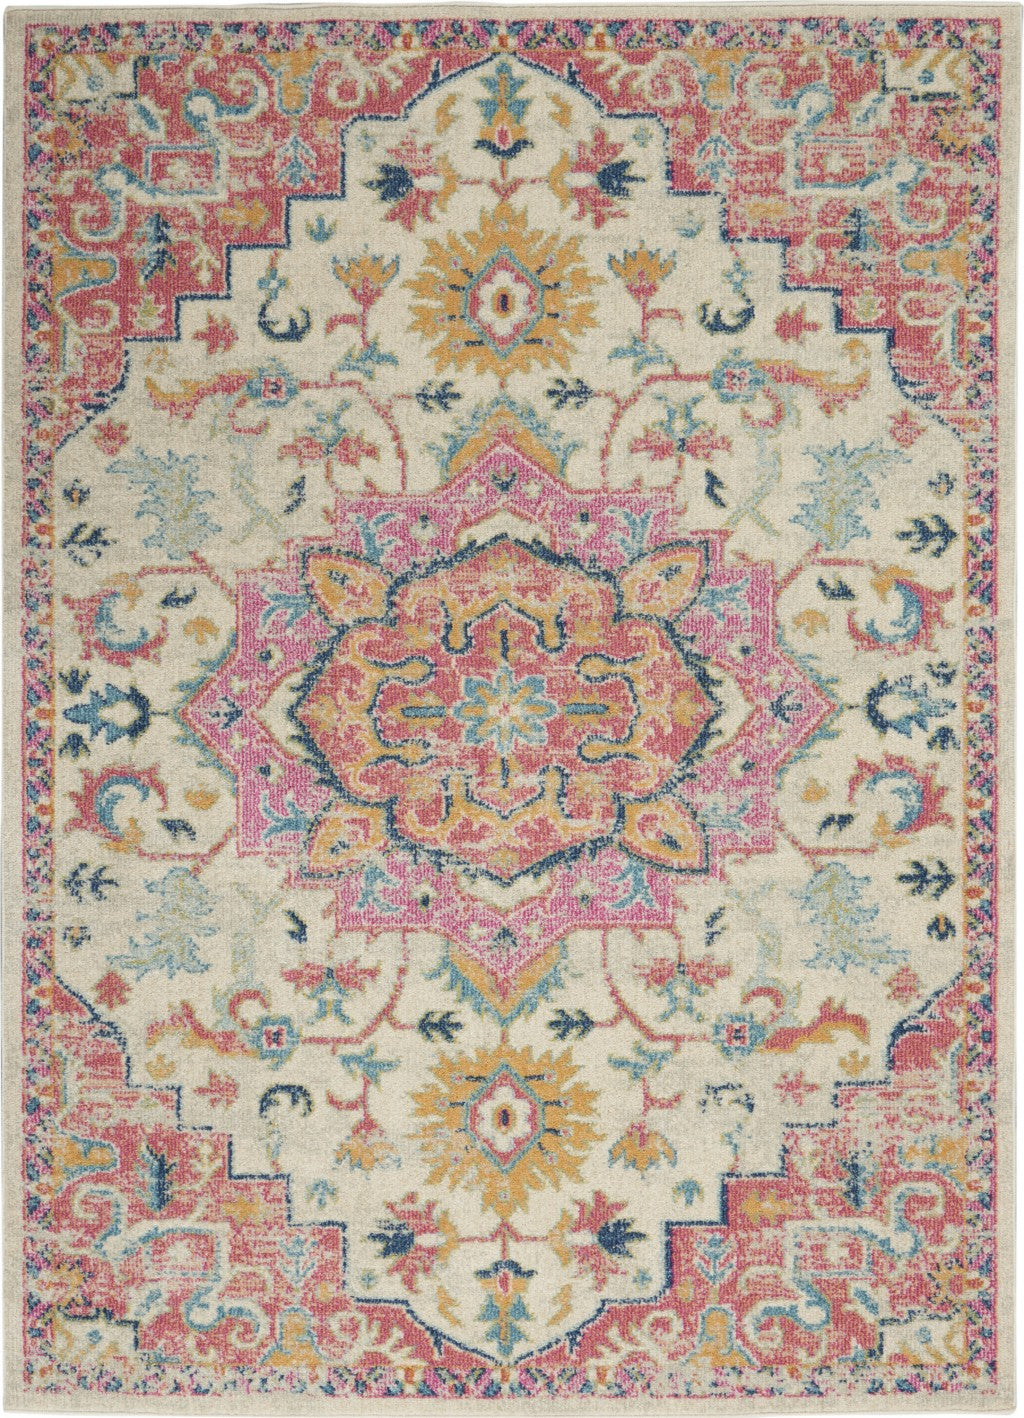 5’ x 7’ Ivory and Pink Medallion Area Rug